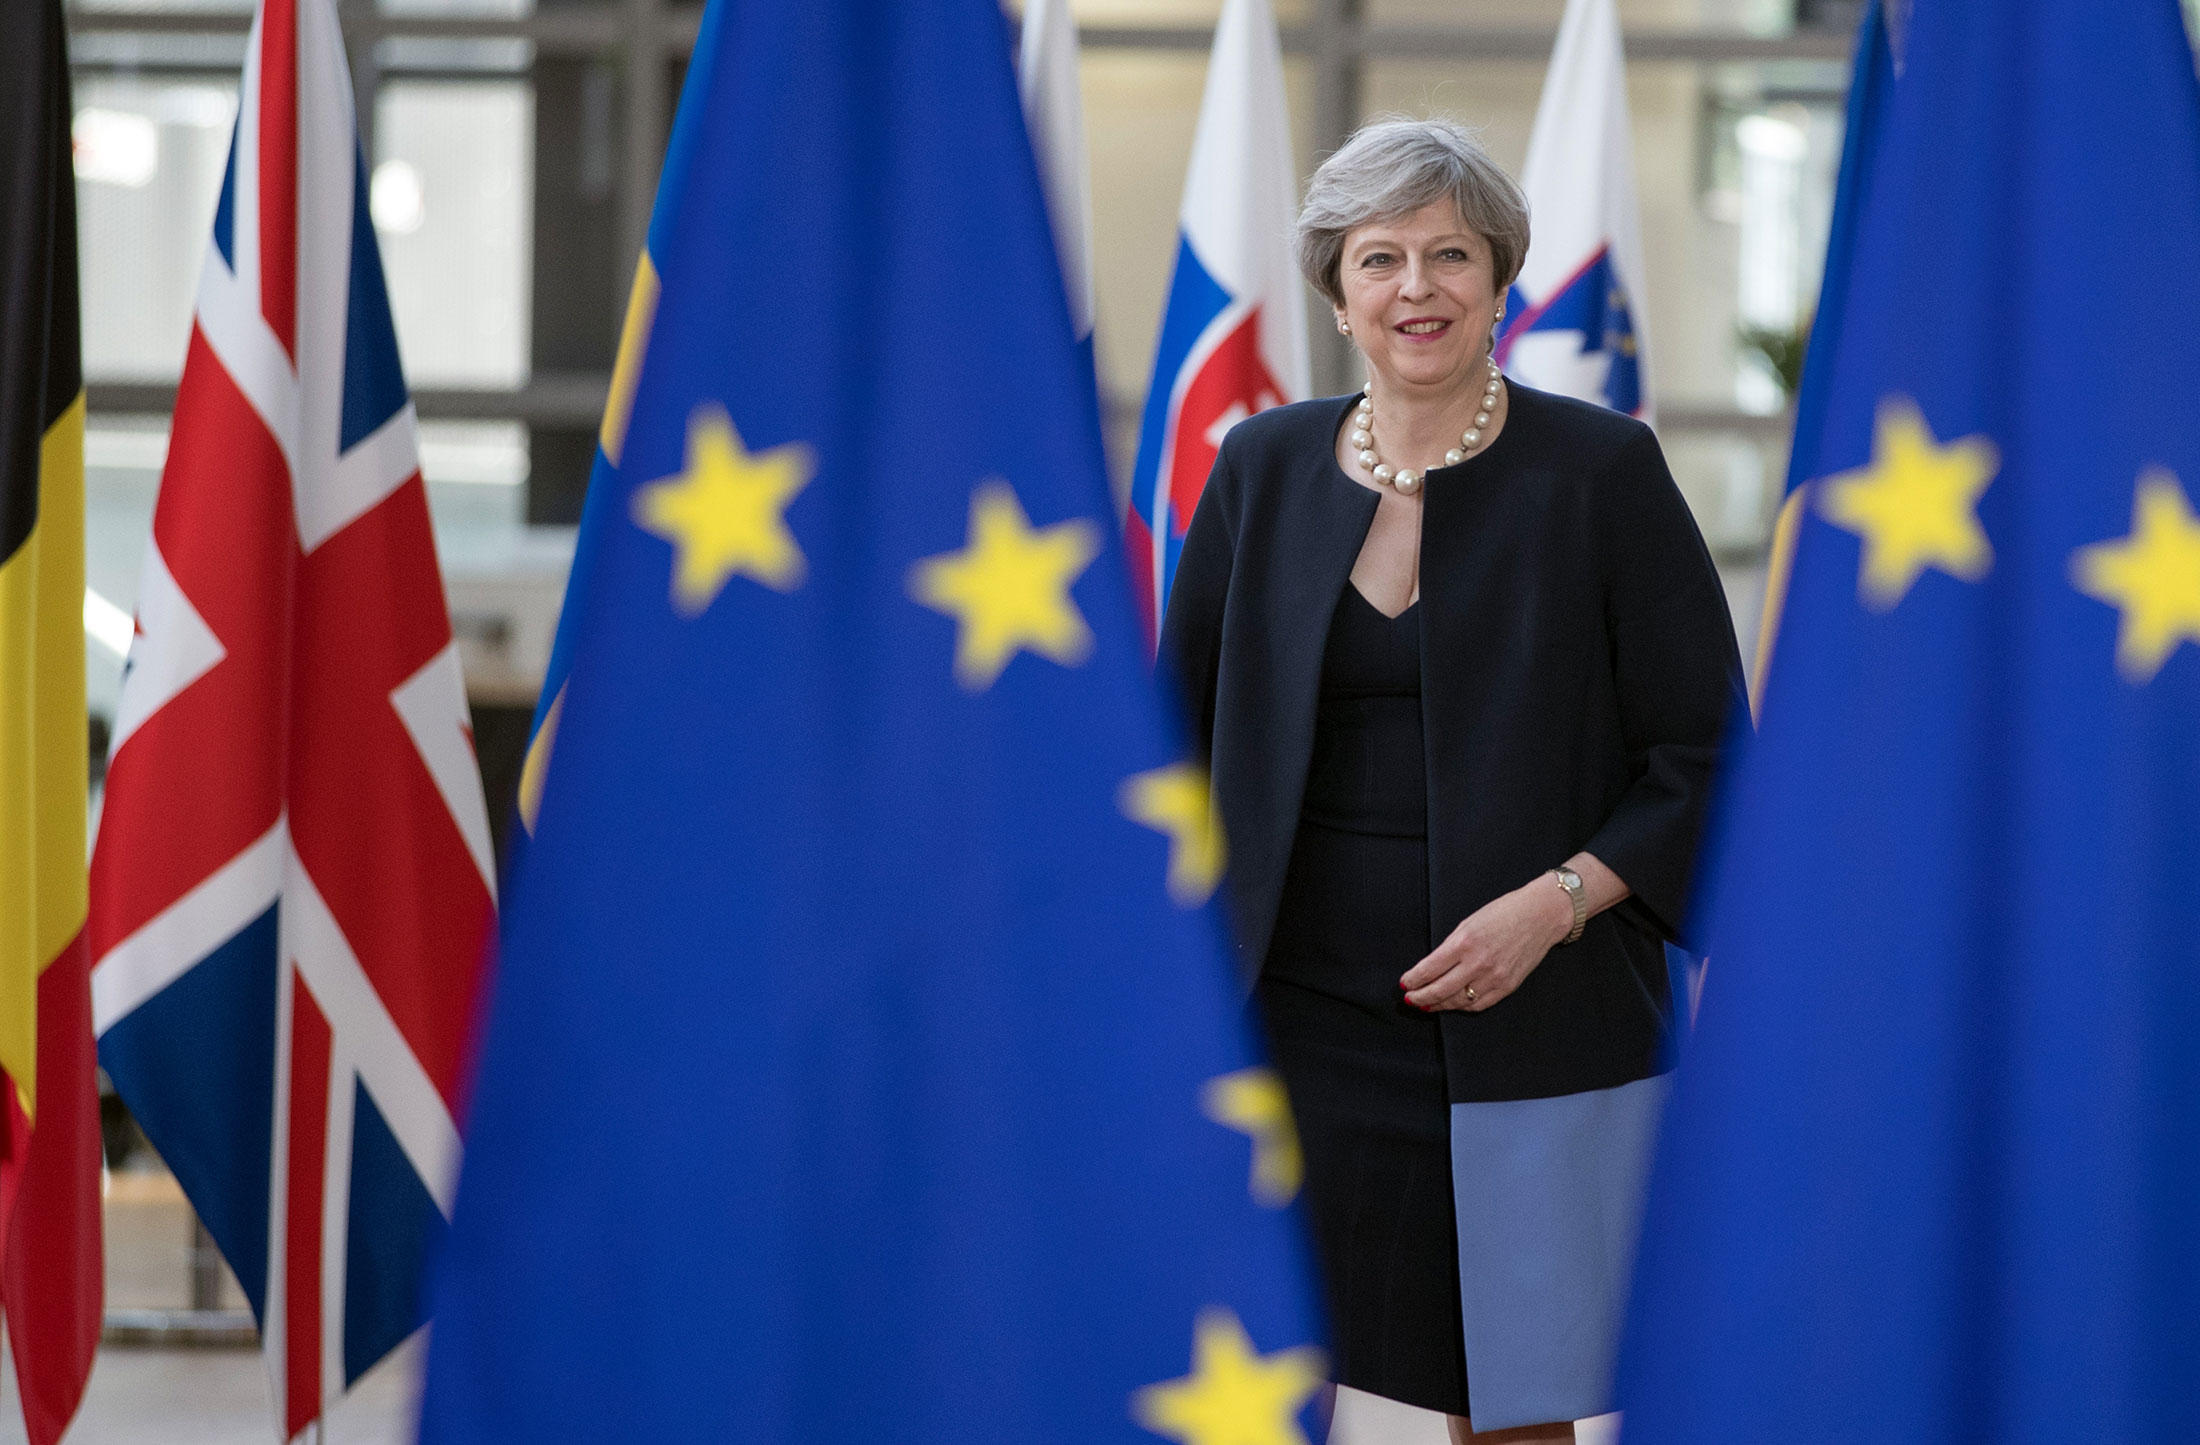 Theresa May, U.K. prime minister, arrives for a European Union (EU) leaders summit at the Europa building in Brussels, Belgium, on Thursday, June 22, 2017. EU leaders are expected to reaffirm their commitment to 'robust' free trade and the Paris Agreement on climate change when the two-day meeting concludes on Friday.
